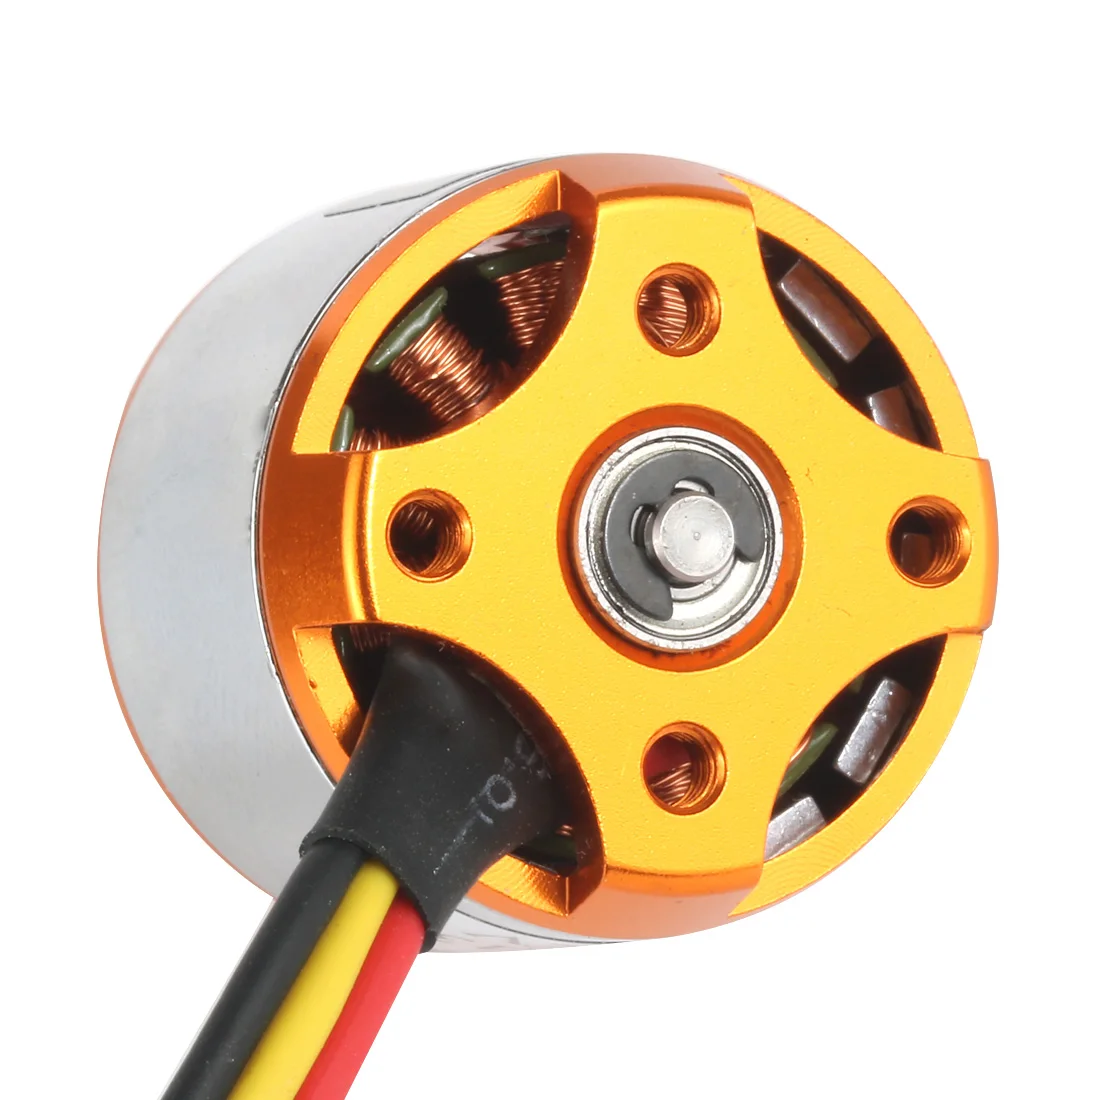 A221210T 1400KV Brushless DC Motor for RC Aircraft/KKmulticopter 4axle Quad copter UFO +FS